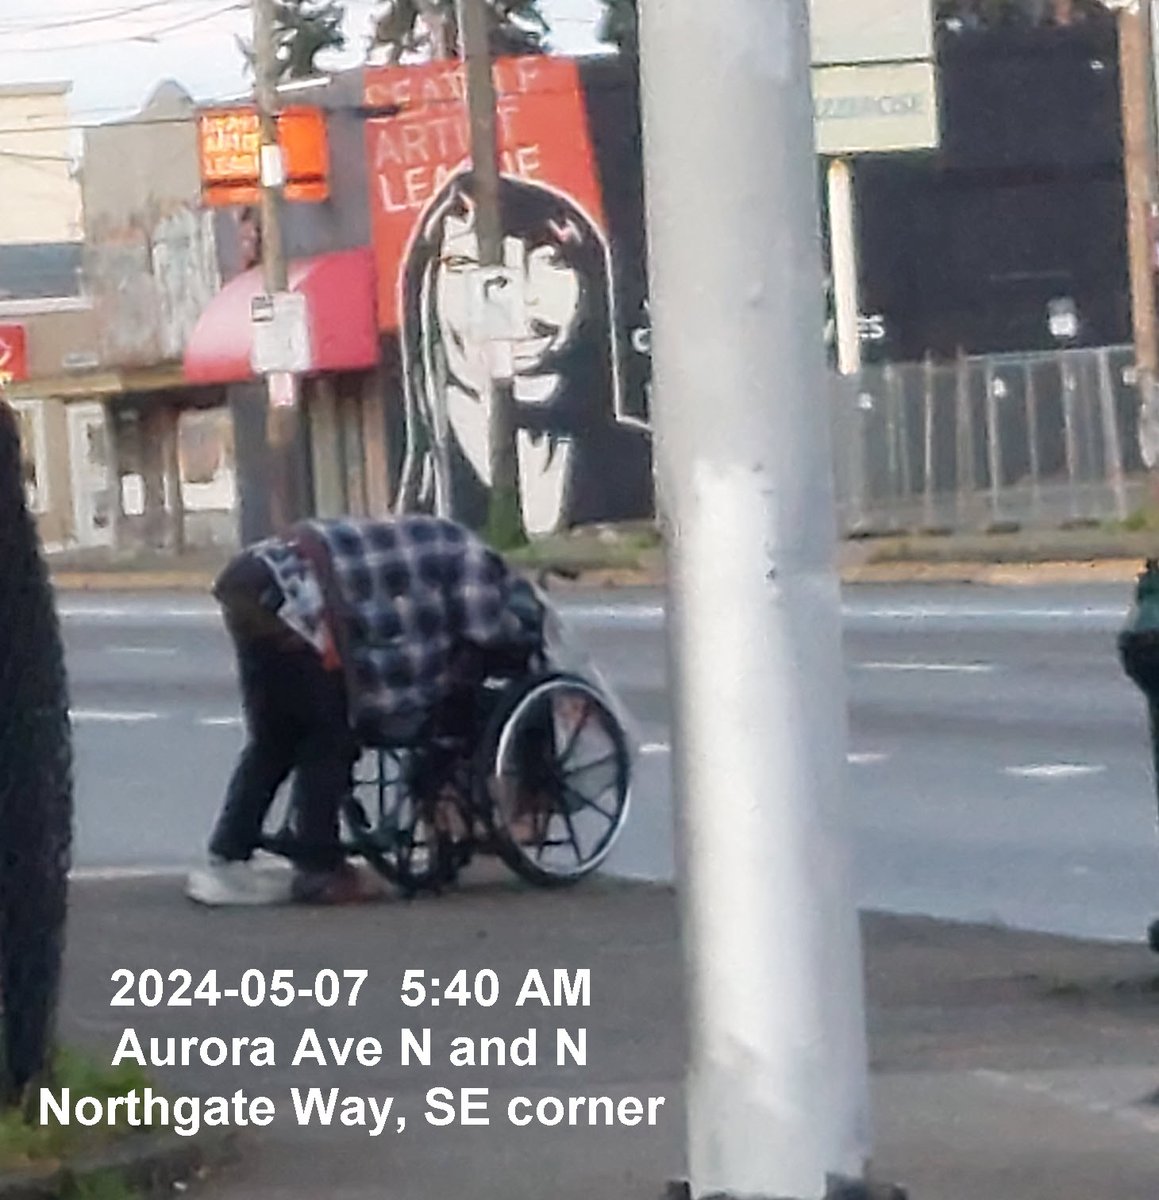 2024-05-07  5:40 AM, Aurora Ave N and N Northgate Way, SE corner, in north #Seattle. @MayorofSeattle @SeattleCouncil @VisitSeattle